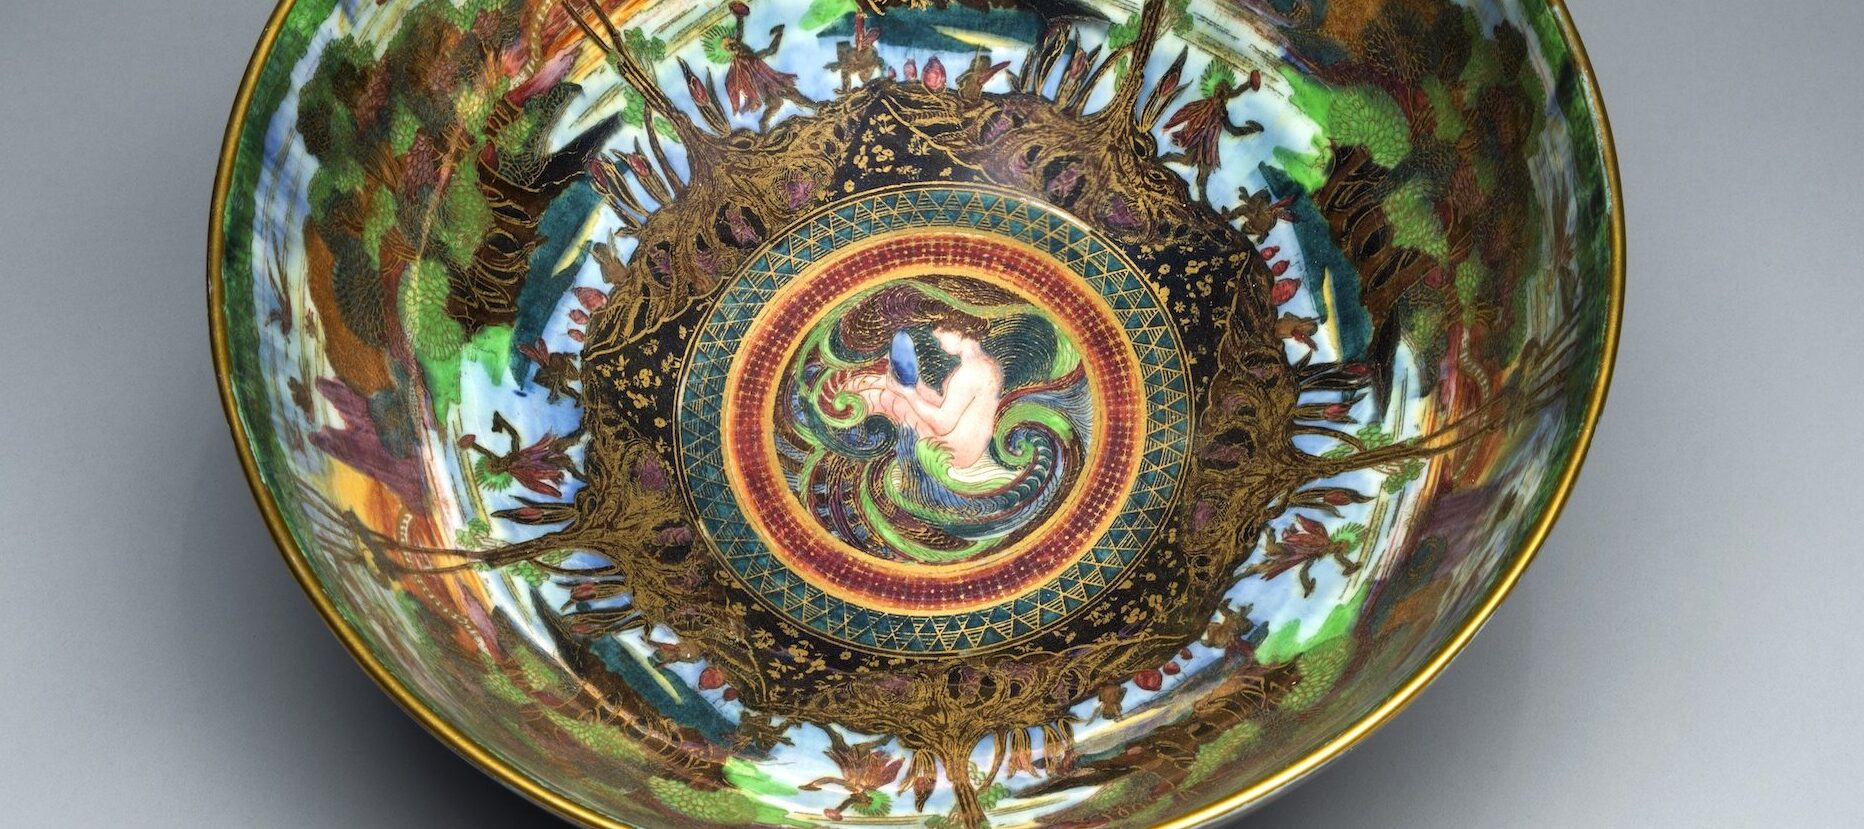 Interior view of a colorful, iridescent lusterware bowl featuring gold cloisonne and an ornamental Art Nouveau design. At the center, a light-skinned mermaid bathes in the ocean. Radiating outward, and repeated five times, is a lush agrarian scene.